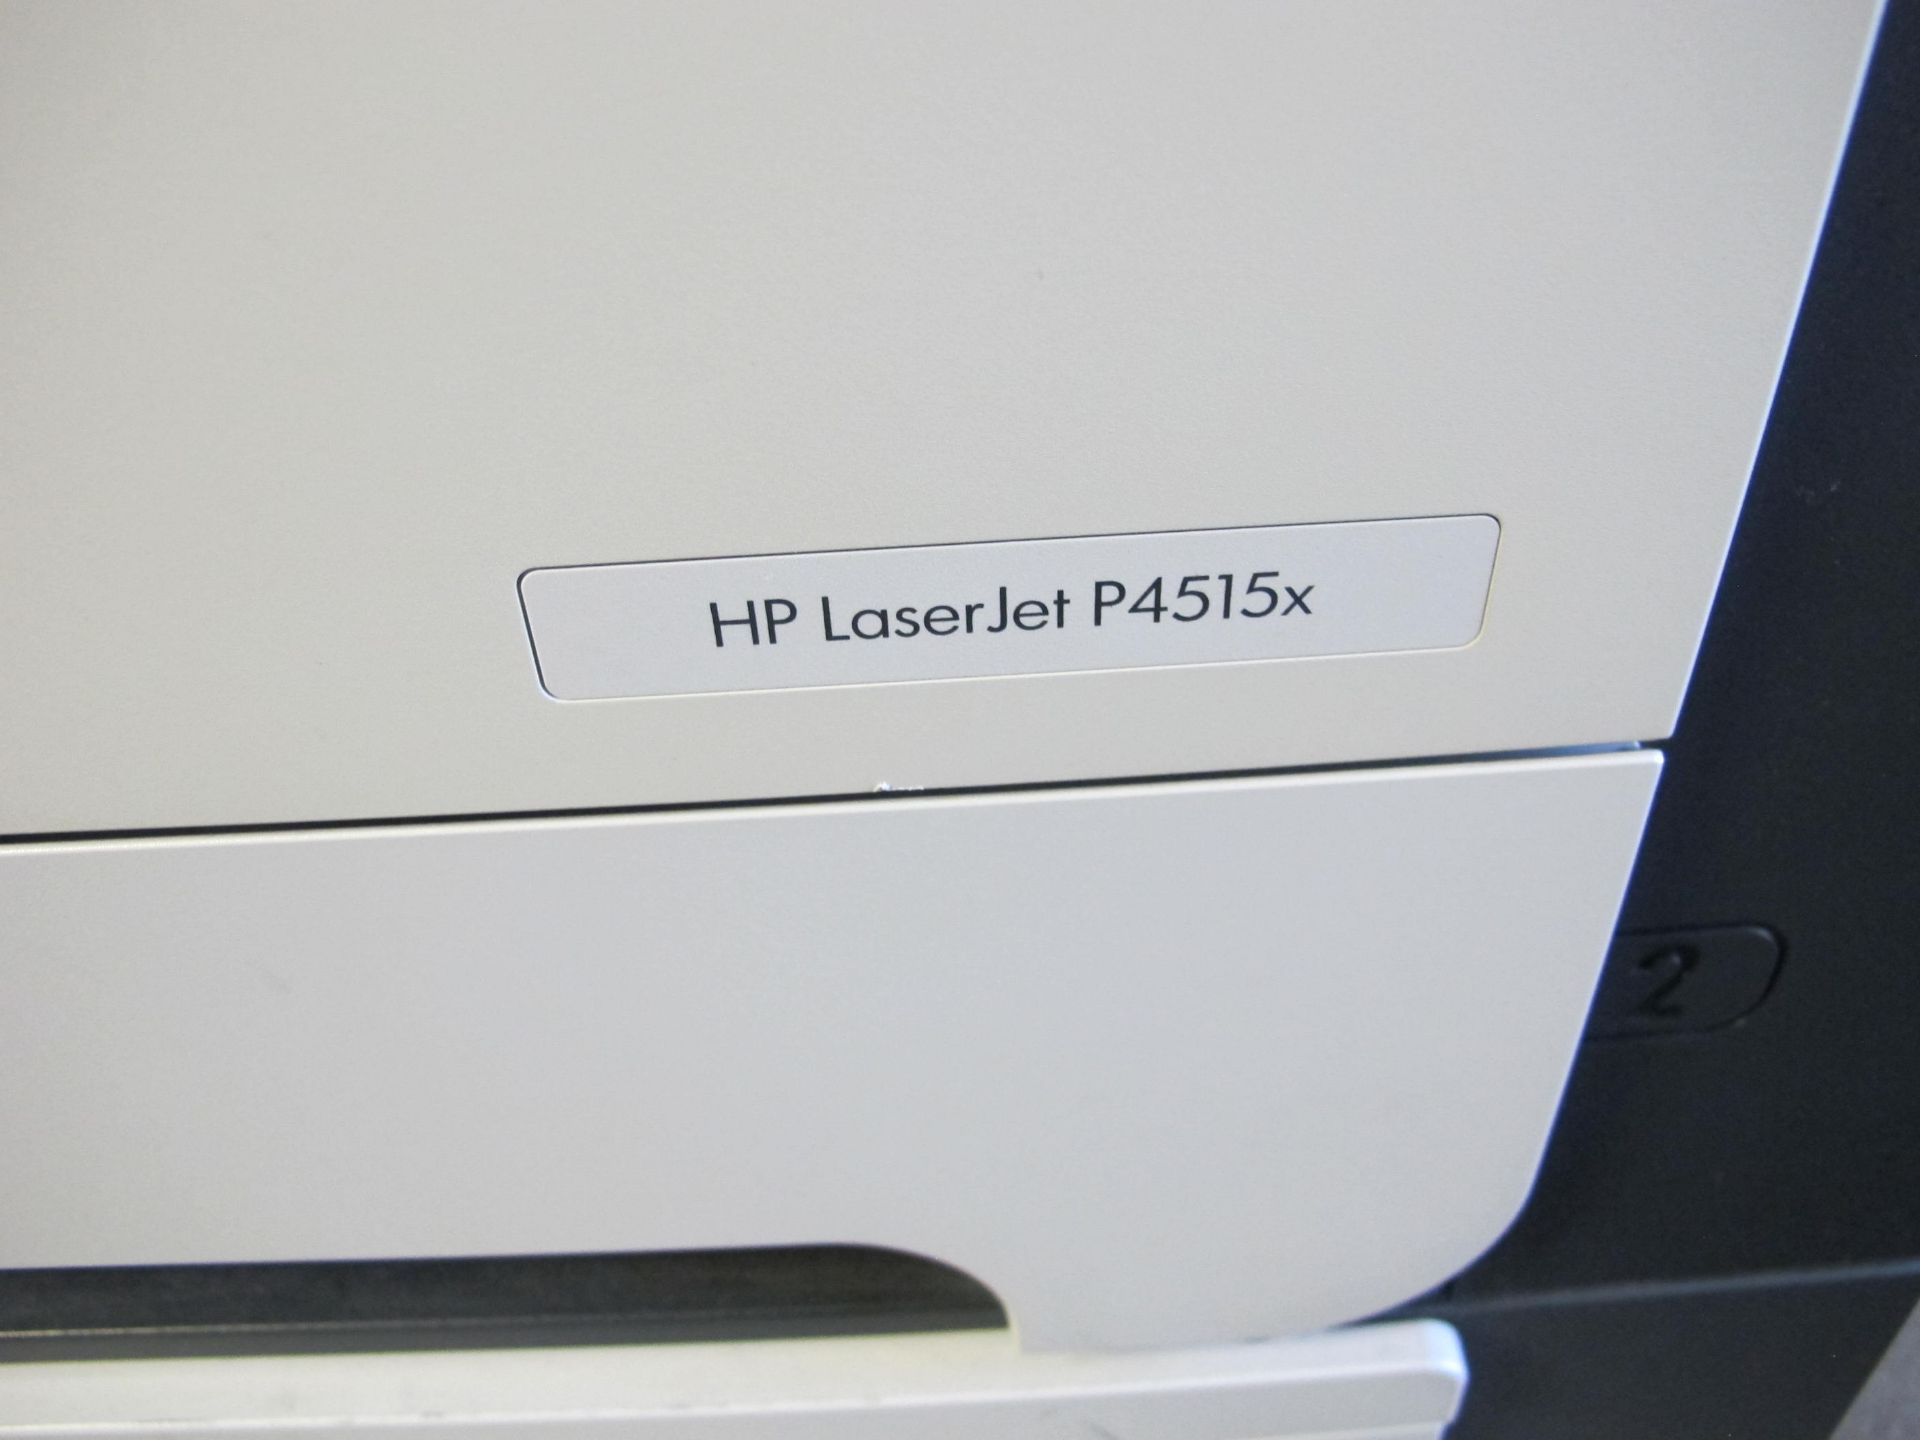 HP LaserJet P4515x Network Printer with Extension Paper Tray - Image 2 of 2